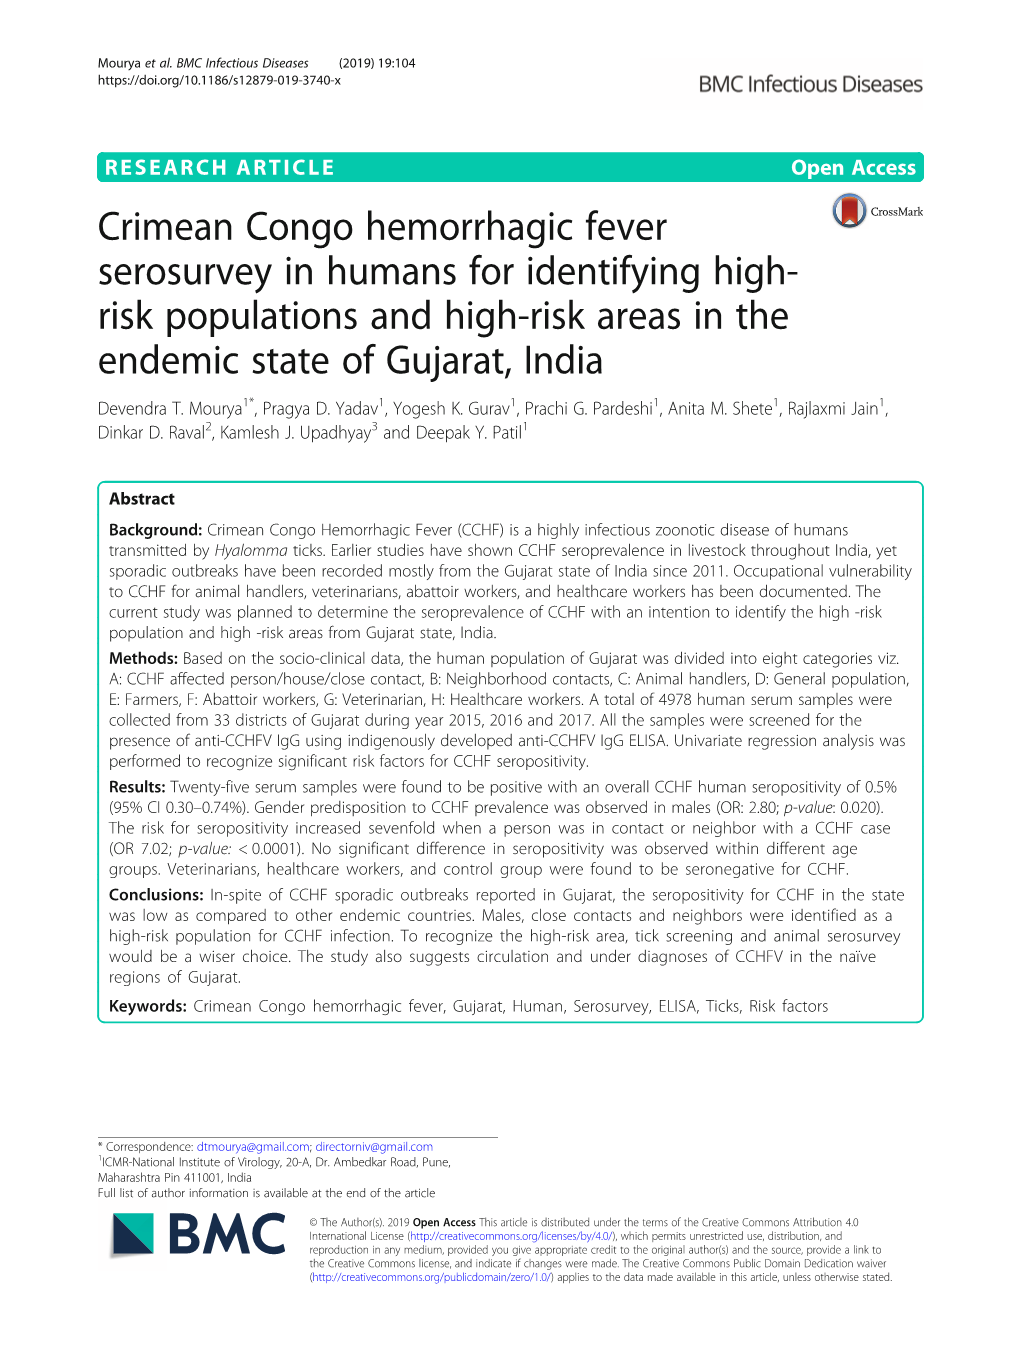 Crimean Congo Hemorrhagic Fever Serosurvey in Humans for Identifying High- Risk Populations and High-Risk Areas in the Endemic State of Gujarat, India Devendra T